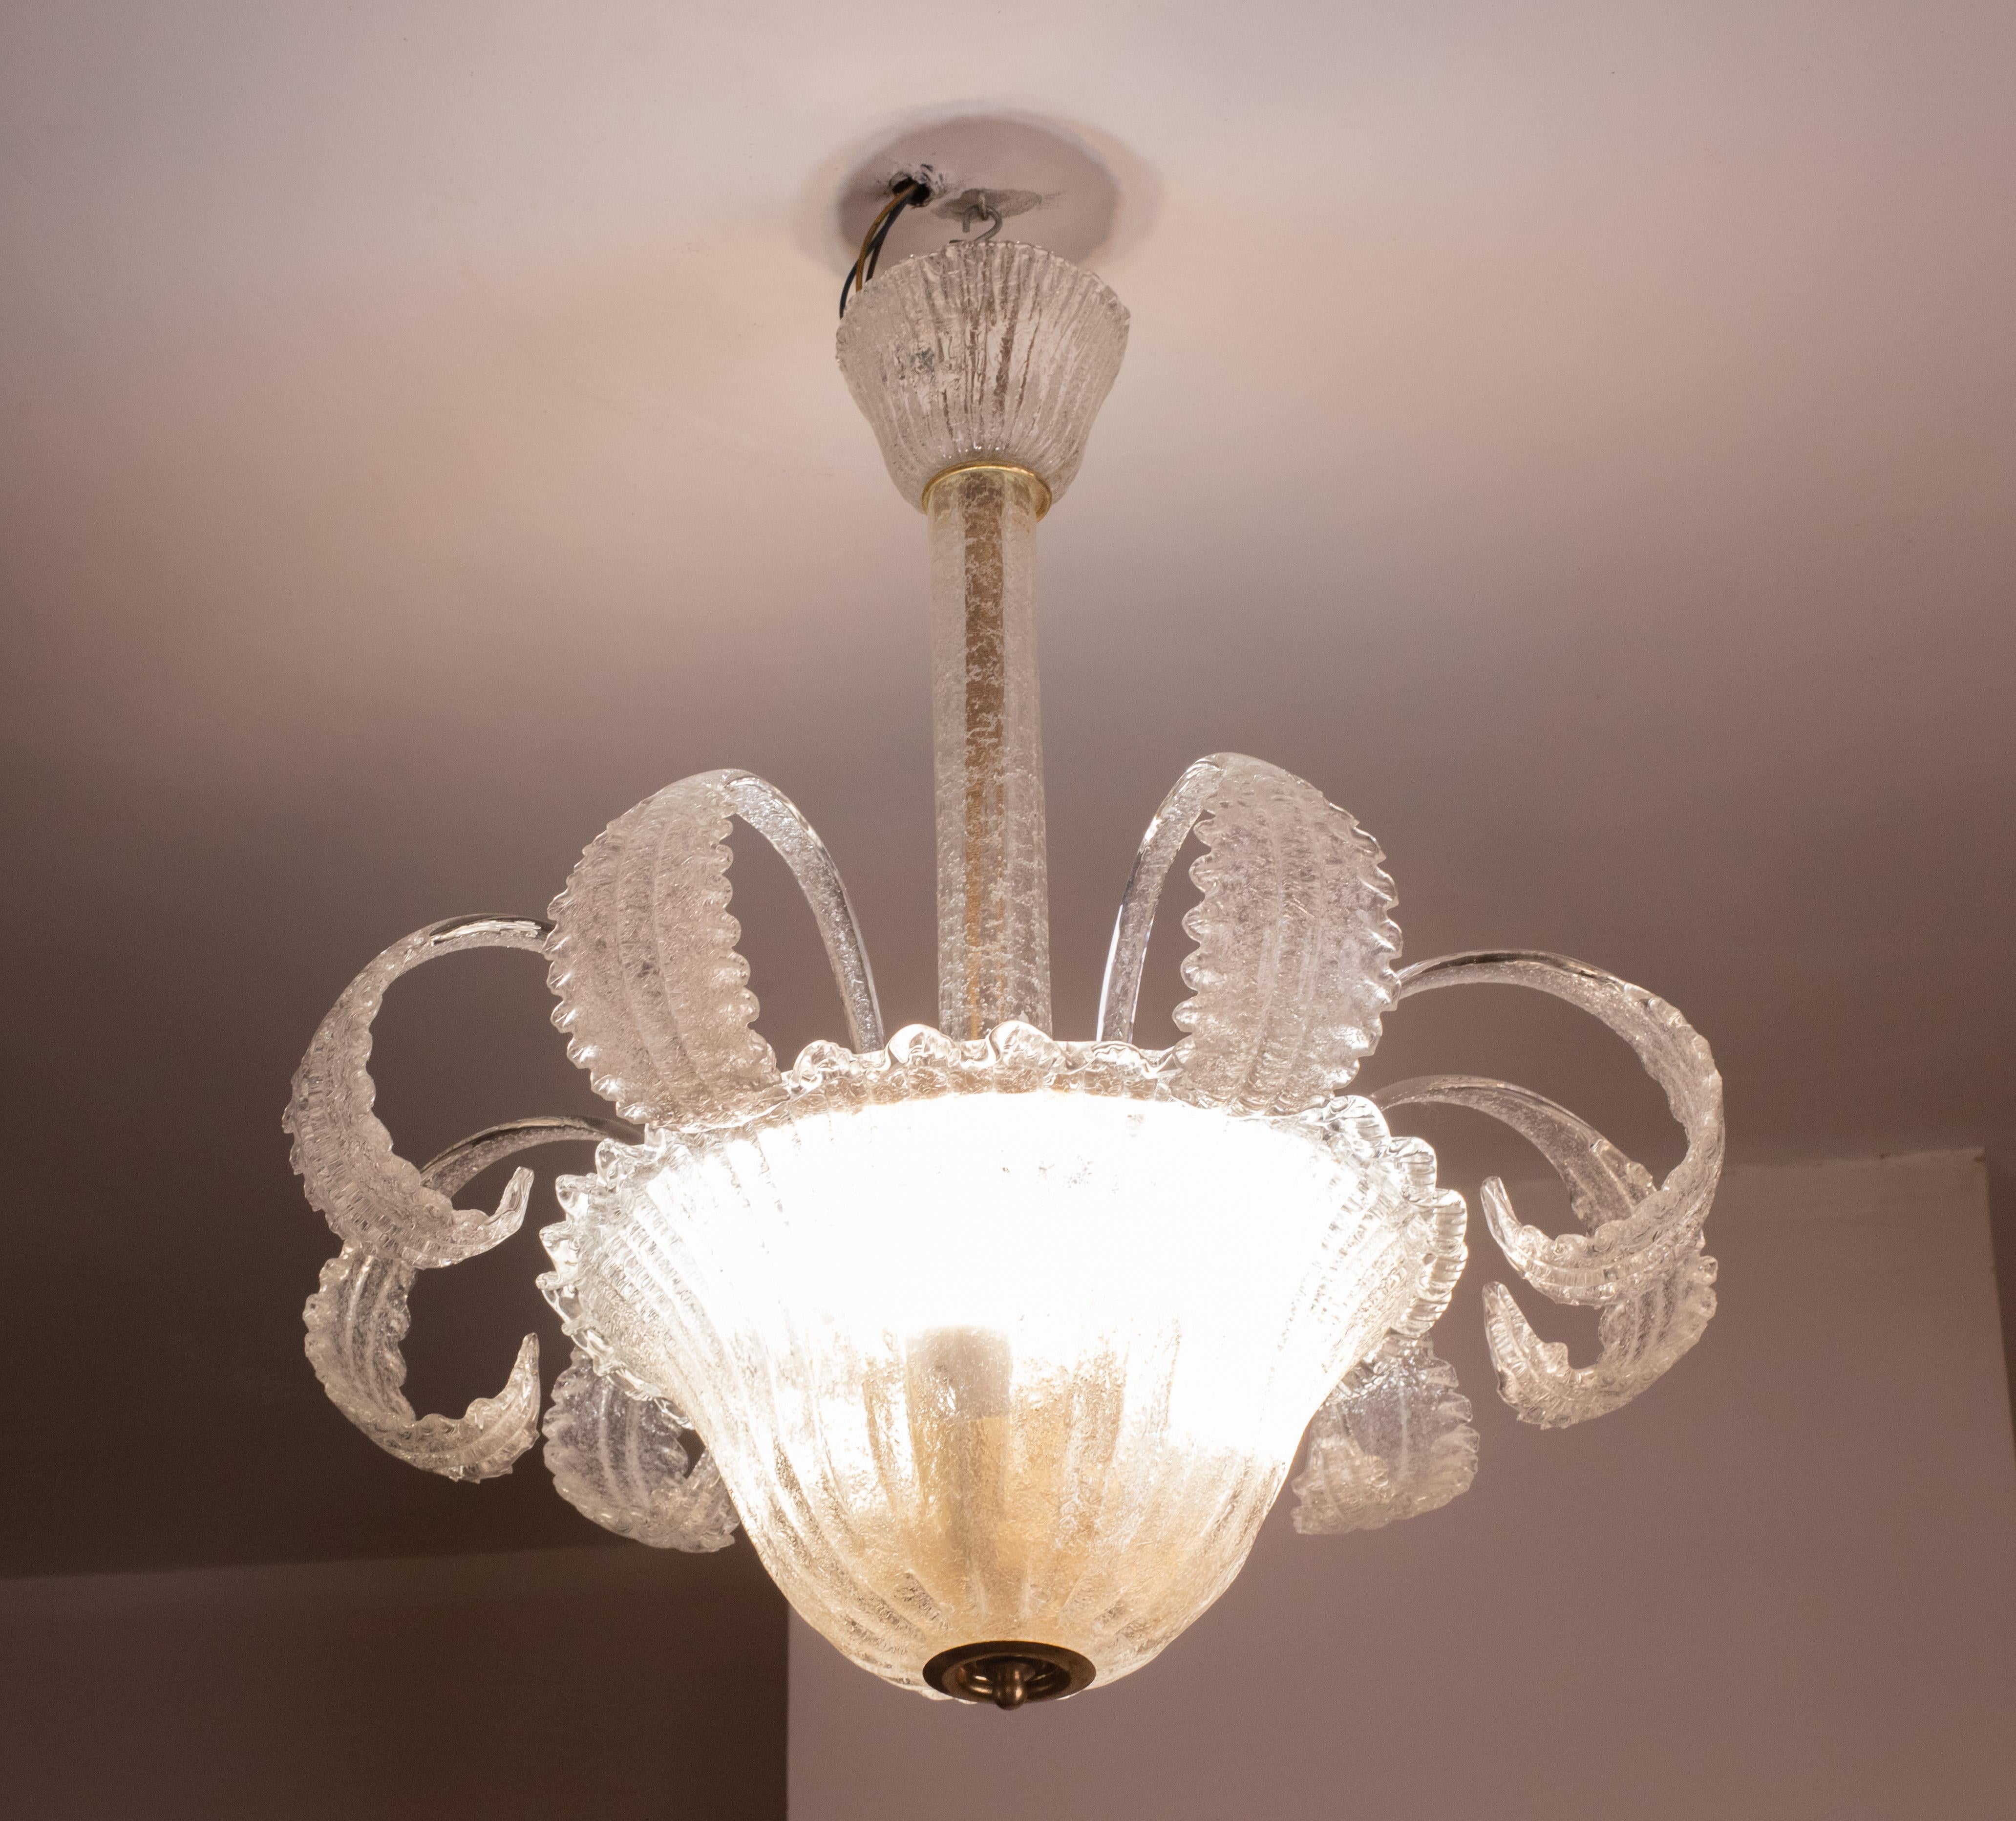 Elegant Murano chandelier composed on the outside of only glass elements.

The chandelier consists of a rosette a trunk and an impressive central disk, all decorated with 9 beautiful leaves.

The height measures 70 centimeters, the diameter 60